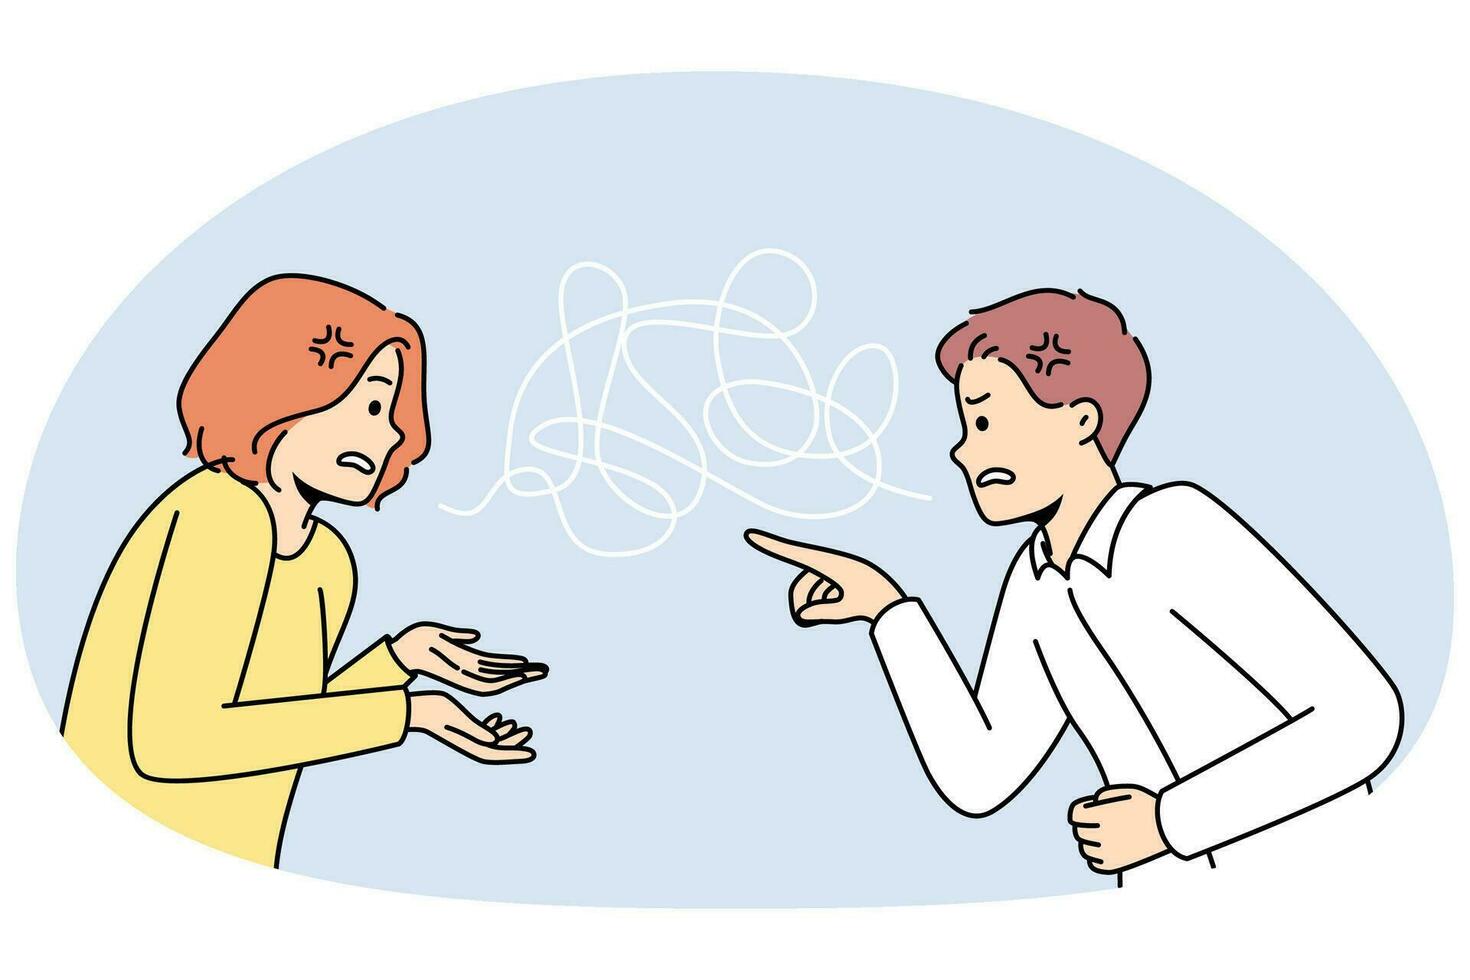 Couple fight involved in toxic relationship blaming each other. Man and woman argue lead to breakup or divorce. Relation problem. Vector illustration.